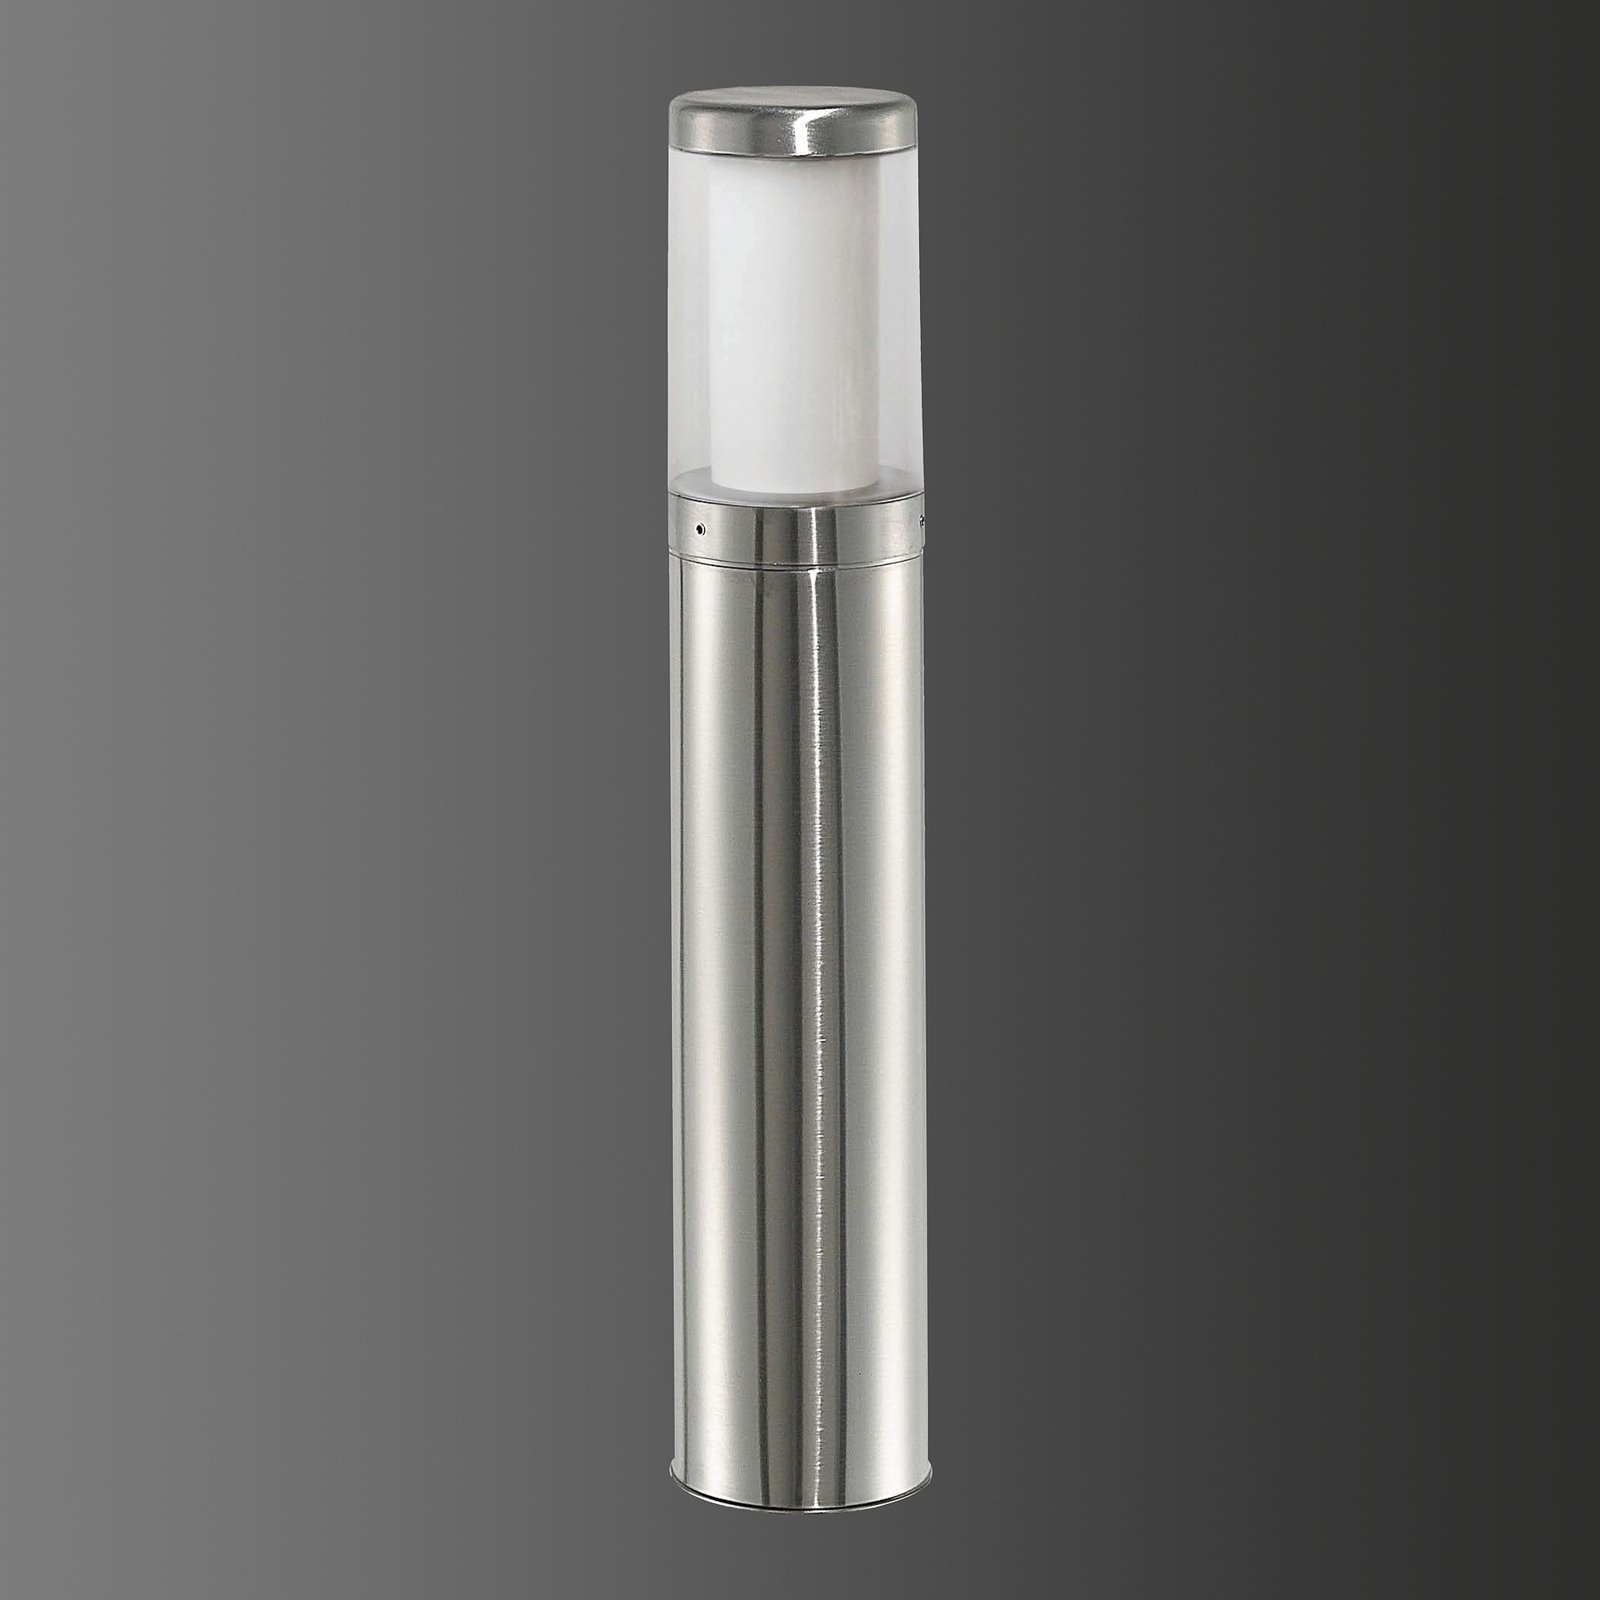 Path light 1257 made of stainless steel seawater resistant 100cm